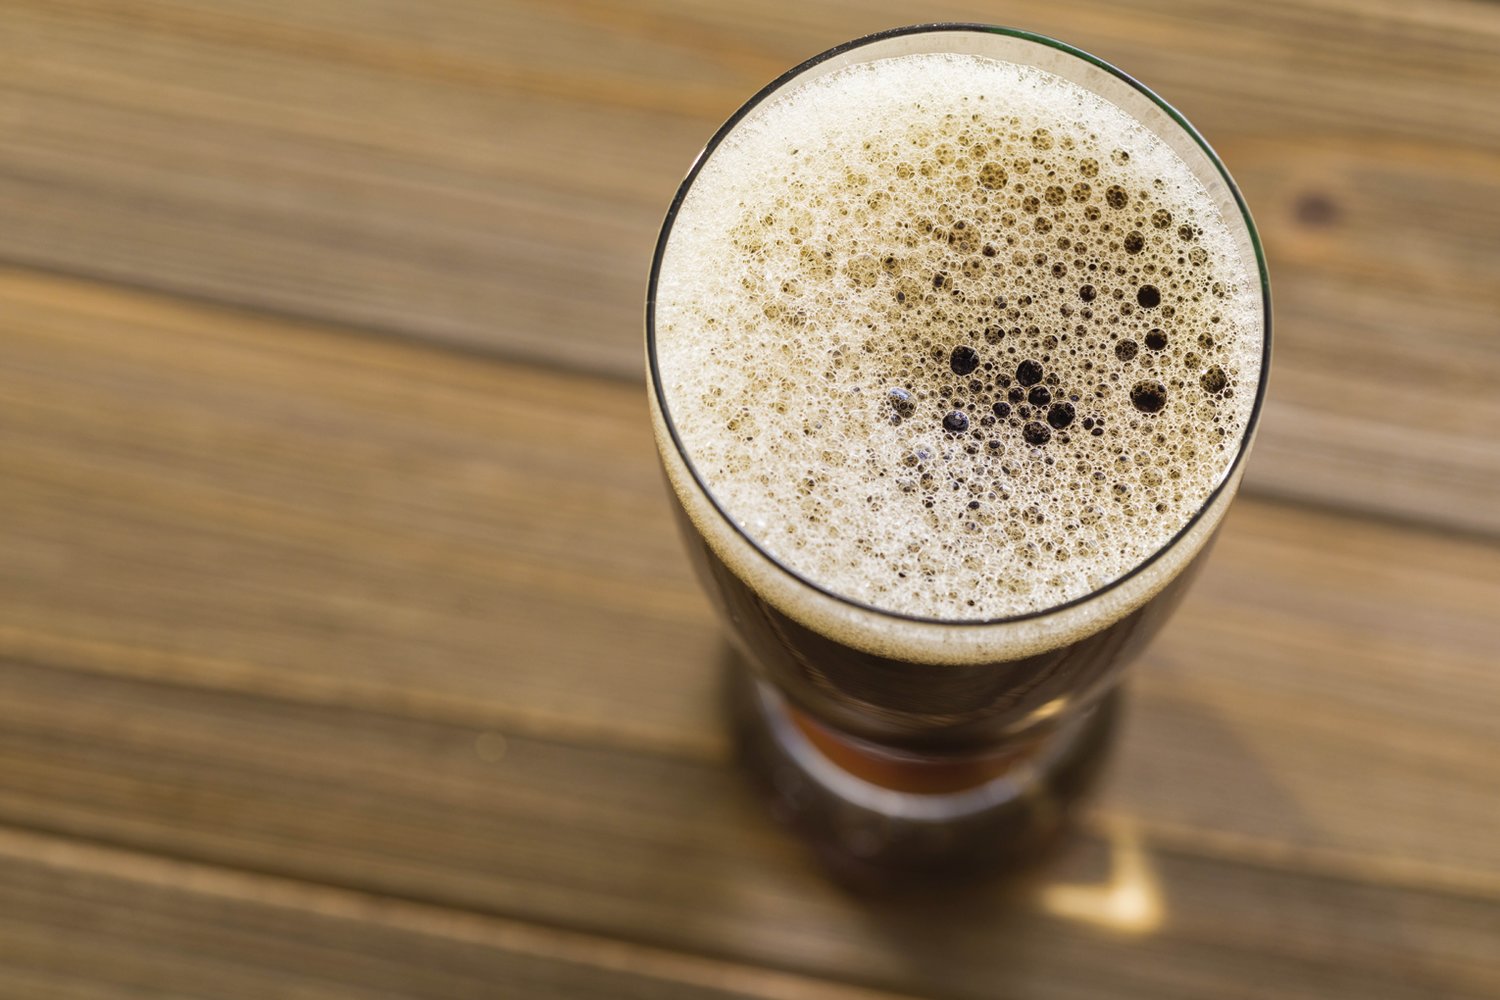 The best bartenders in the area are testing their skills against each other in the Best Guinness Pour charity contest. Bartenders will be judged on how well they can pour the perfect pint, perfect half and half, and if they can make a shamrock on these perfect pours.